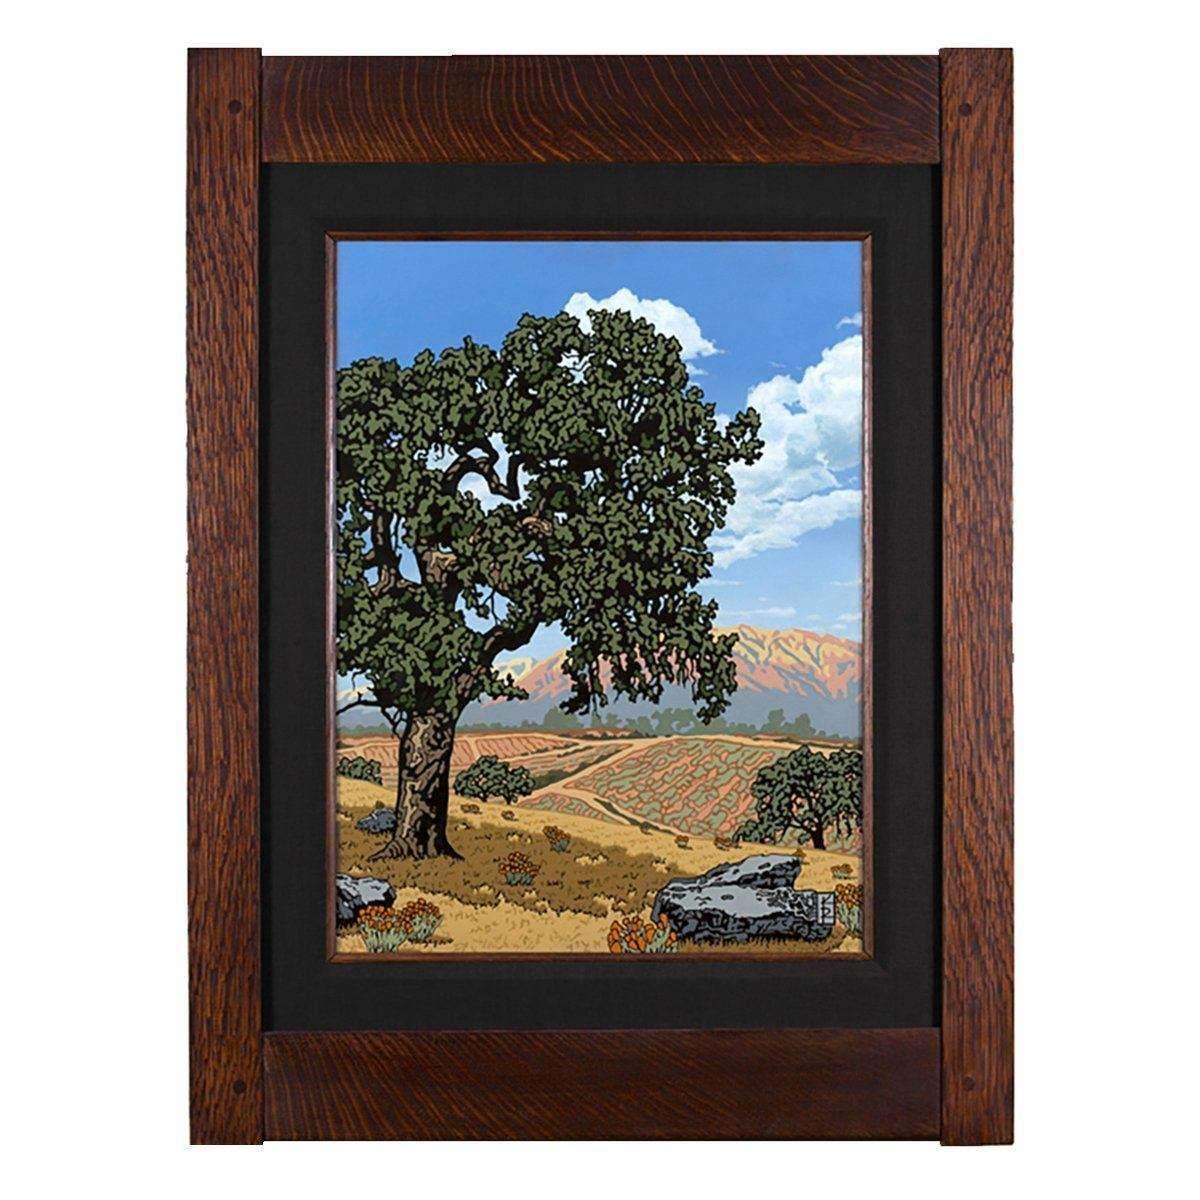 Sentinel Oak - California Valley Giclee Decor Keith Rust Extra Extra Large Coal Black 